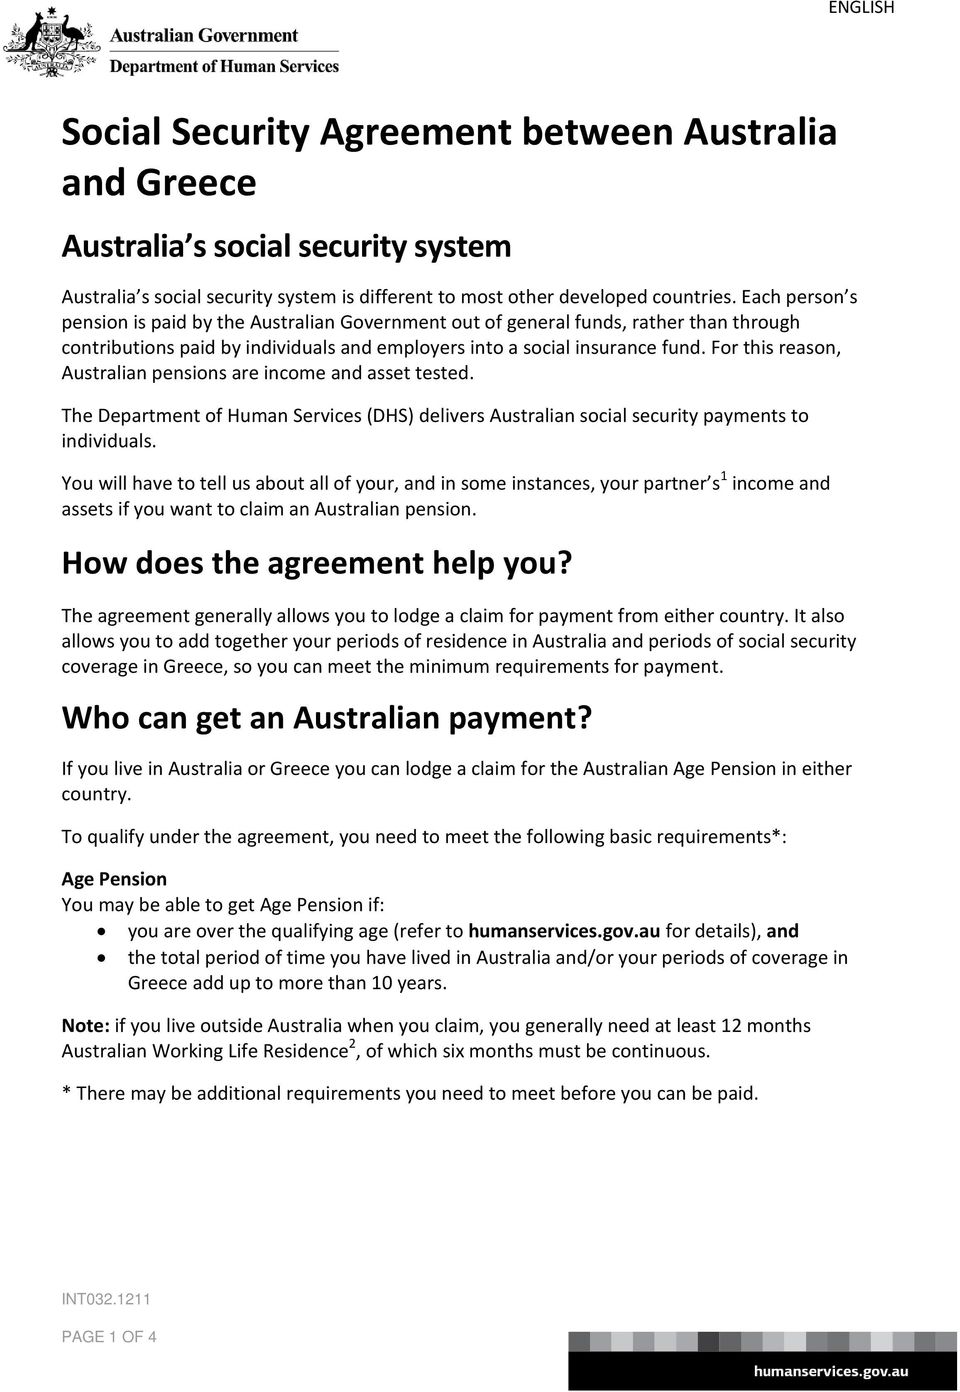 For this reason, Australian pensions are income and asset tested. The (DHS) delivers Australian social security payments to individuals.